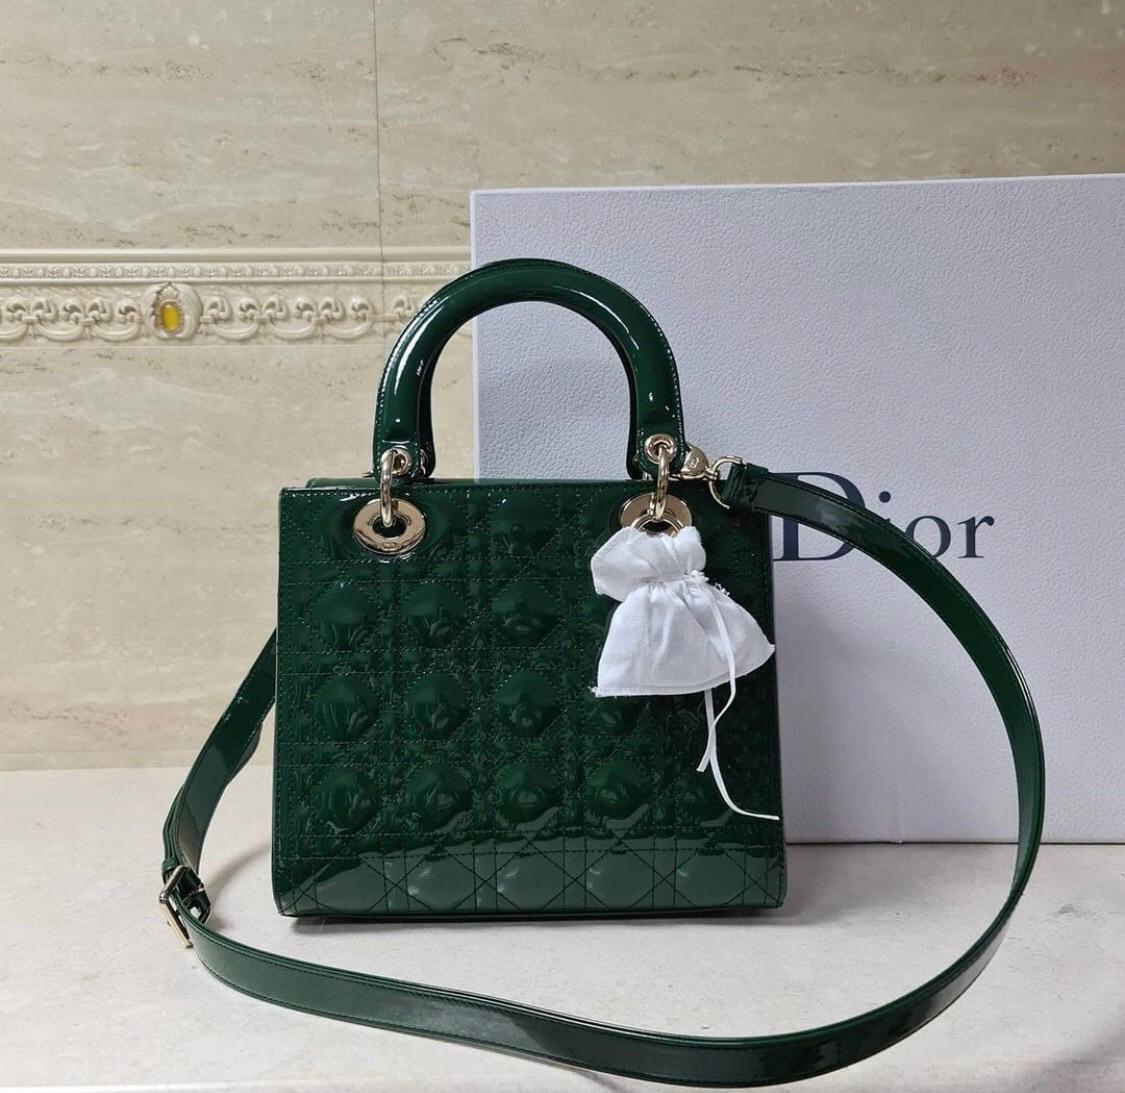 Lady Dior bag in leaf green patent 'Cannage' calfskin, adjustable shoulder strap.

    Jewelry in light gold-tone metal
    Carried in the hand, on the shoulder or across the body
    Dimensions: 24 x 20 x 11 cm

Never worn. Comes with box and dust